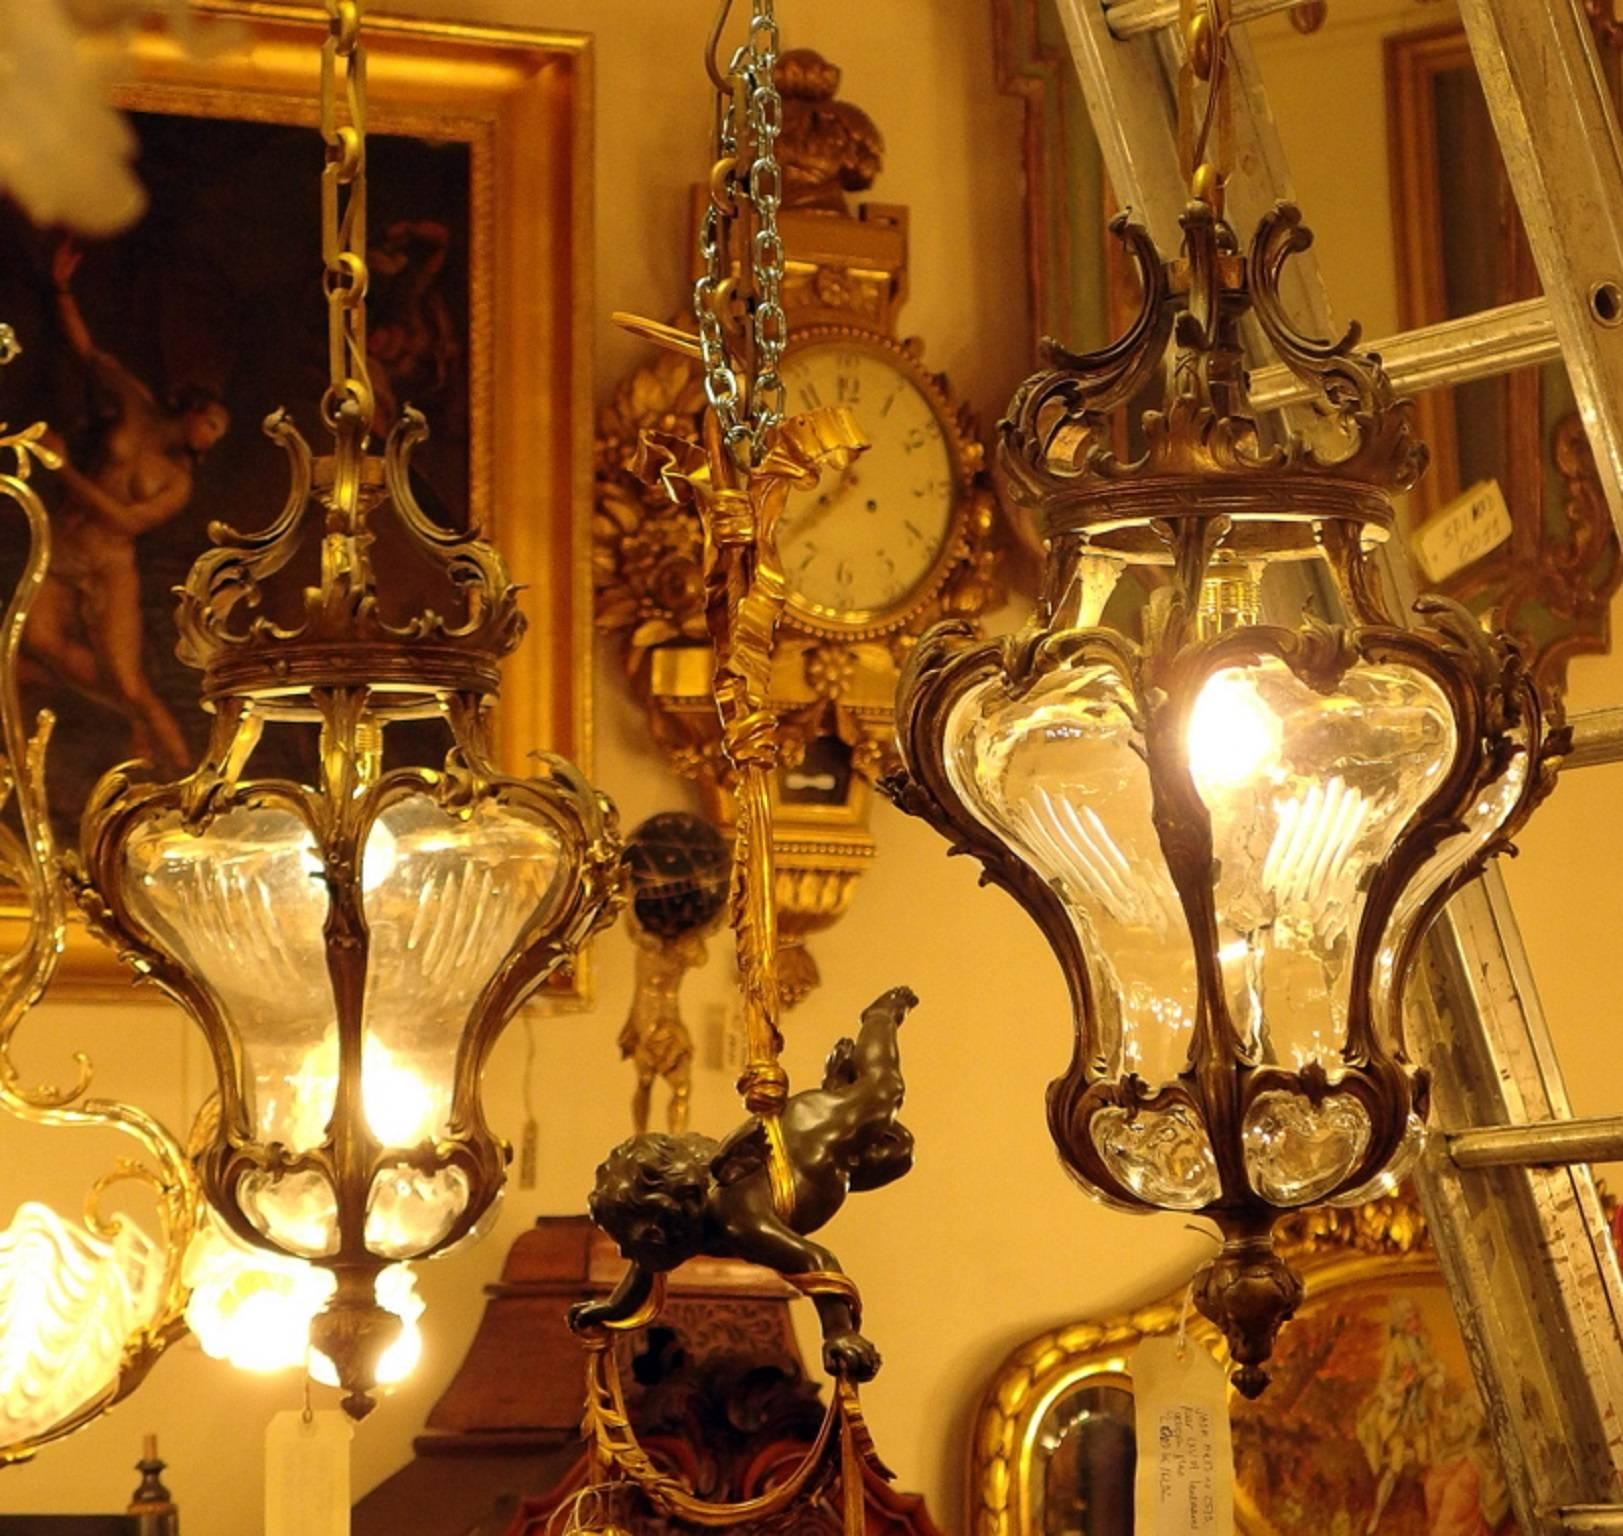 A real and original pair of cut glass and bronze fitted and ornamented Hall Lanterns, made in the Baroque style in France, Belle Époque period circa 1880-1900.
The height can be adjusted by the length of the chain.
It is rare to find a real pair